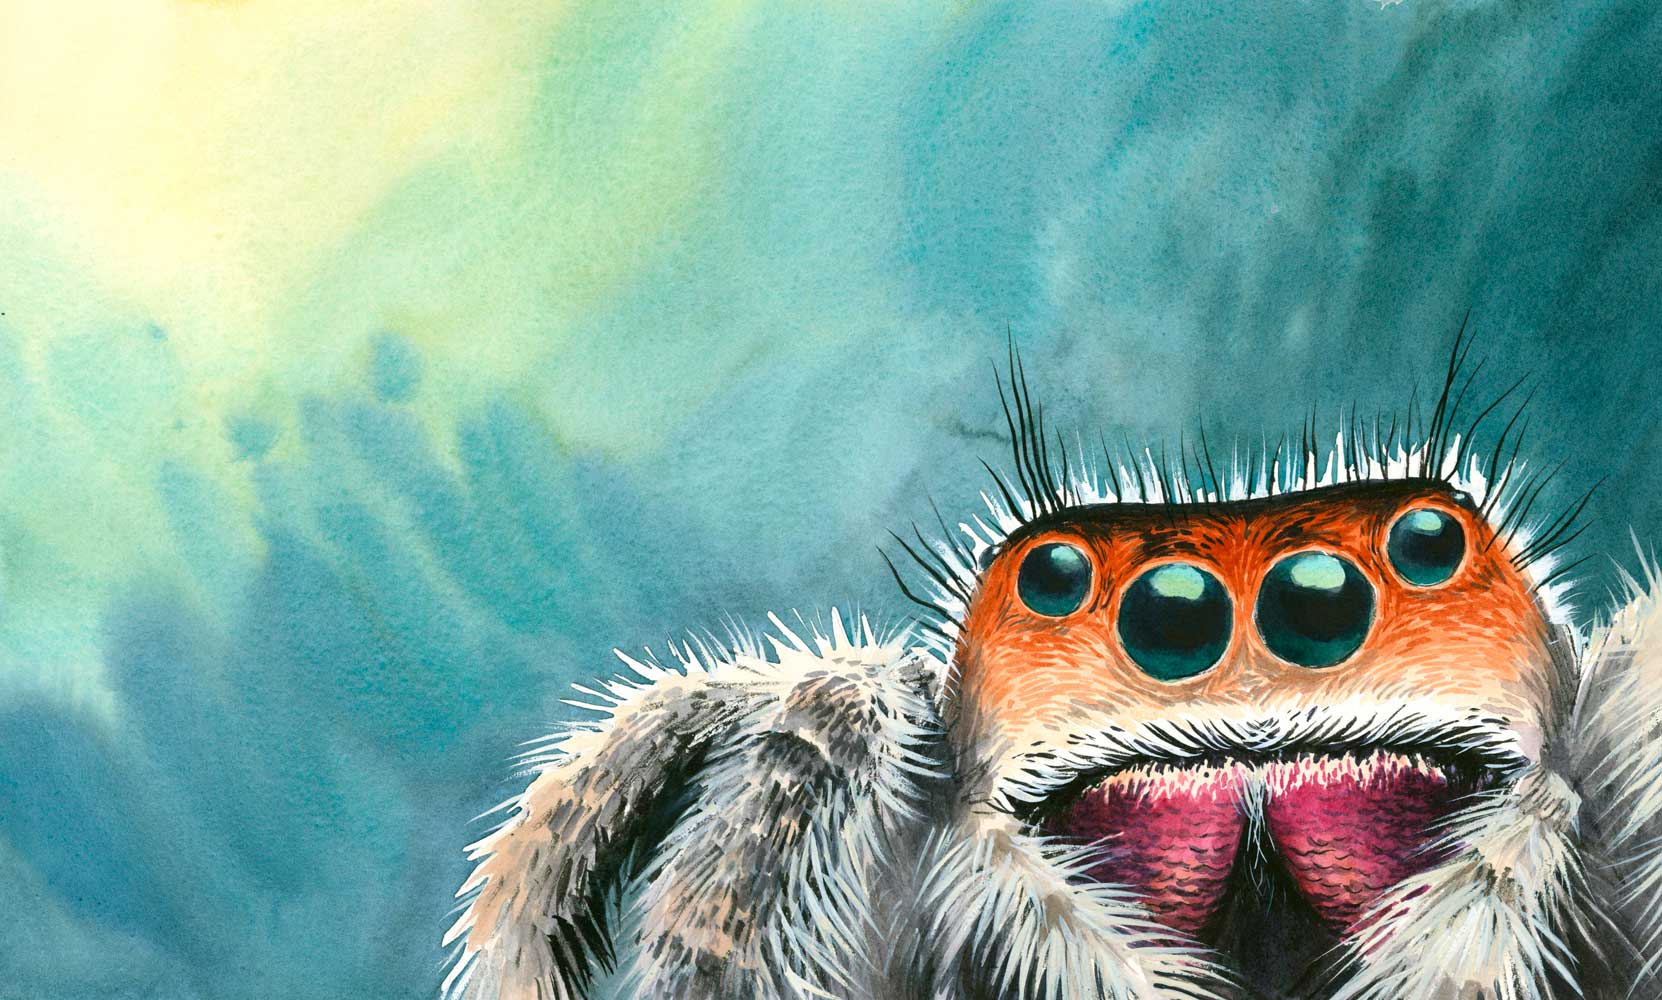 Watercolor illustration by Jessica Lanan from 'Jumper: A Day in the Life of a Backyard Jumping Spider' showing a closeup of the face of a jumping spider. Four large eyes are visible.